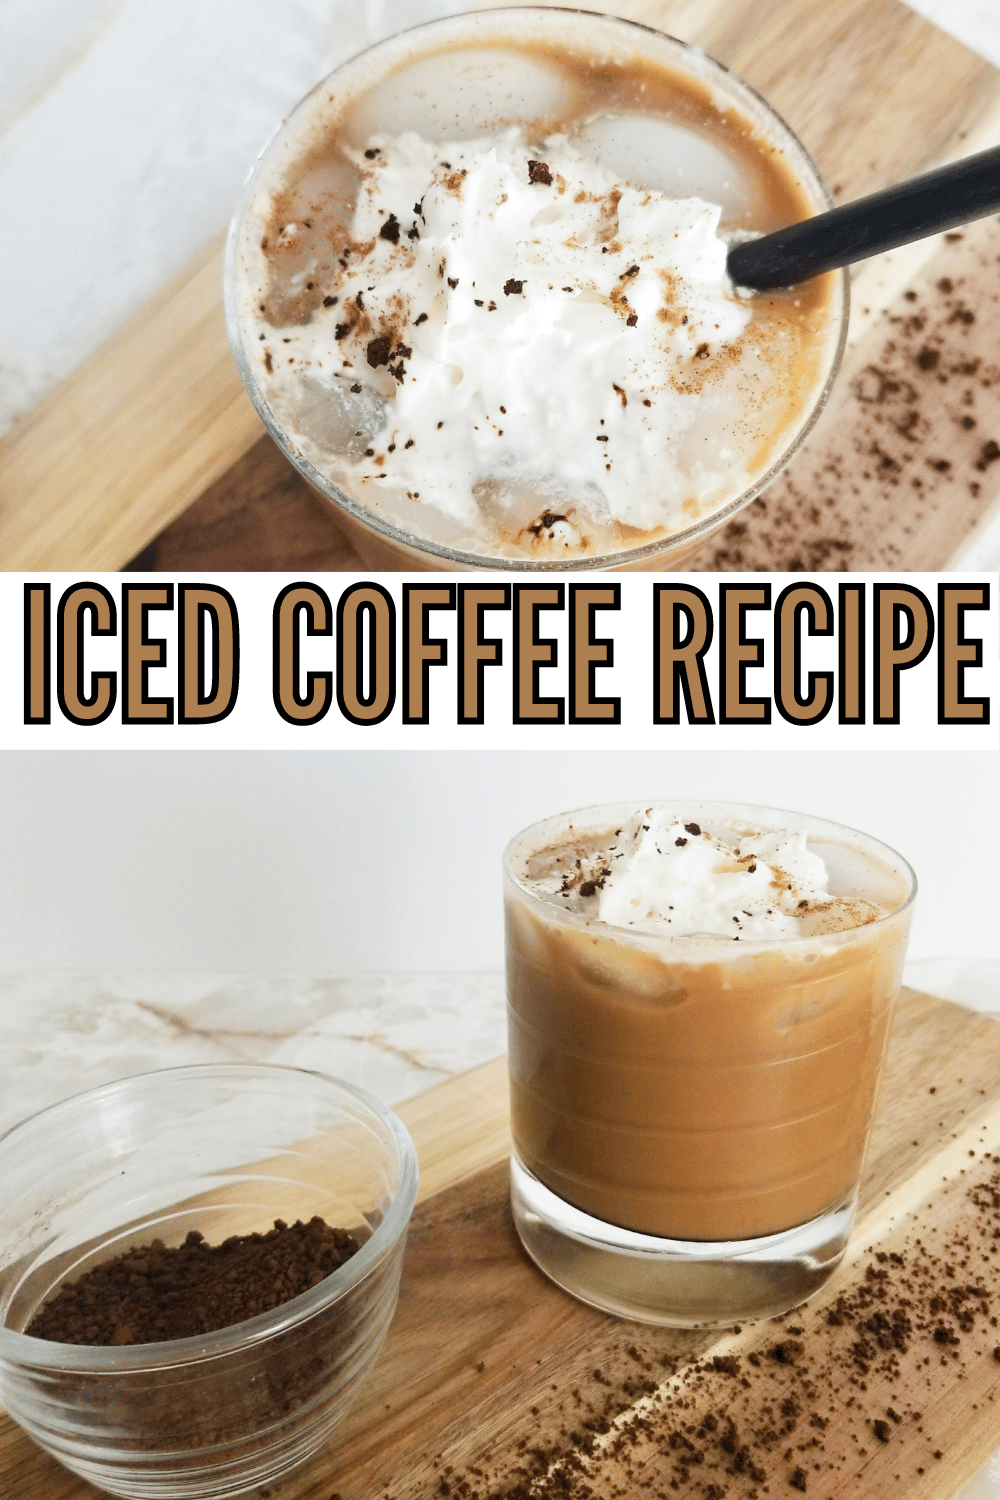 This Iced Coffee recipe is the perfect way to cool off on a hot summer day! When you want a refreshing iced coffee, try this recipe! #icedcoffeerecipe #icedcoffee #coffee #recipe via @wondermomwannab